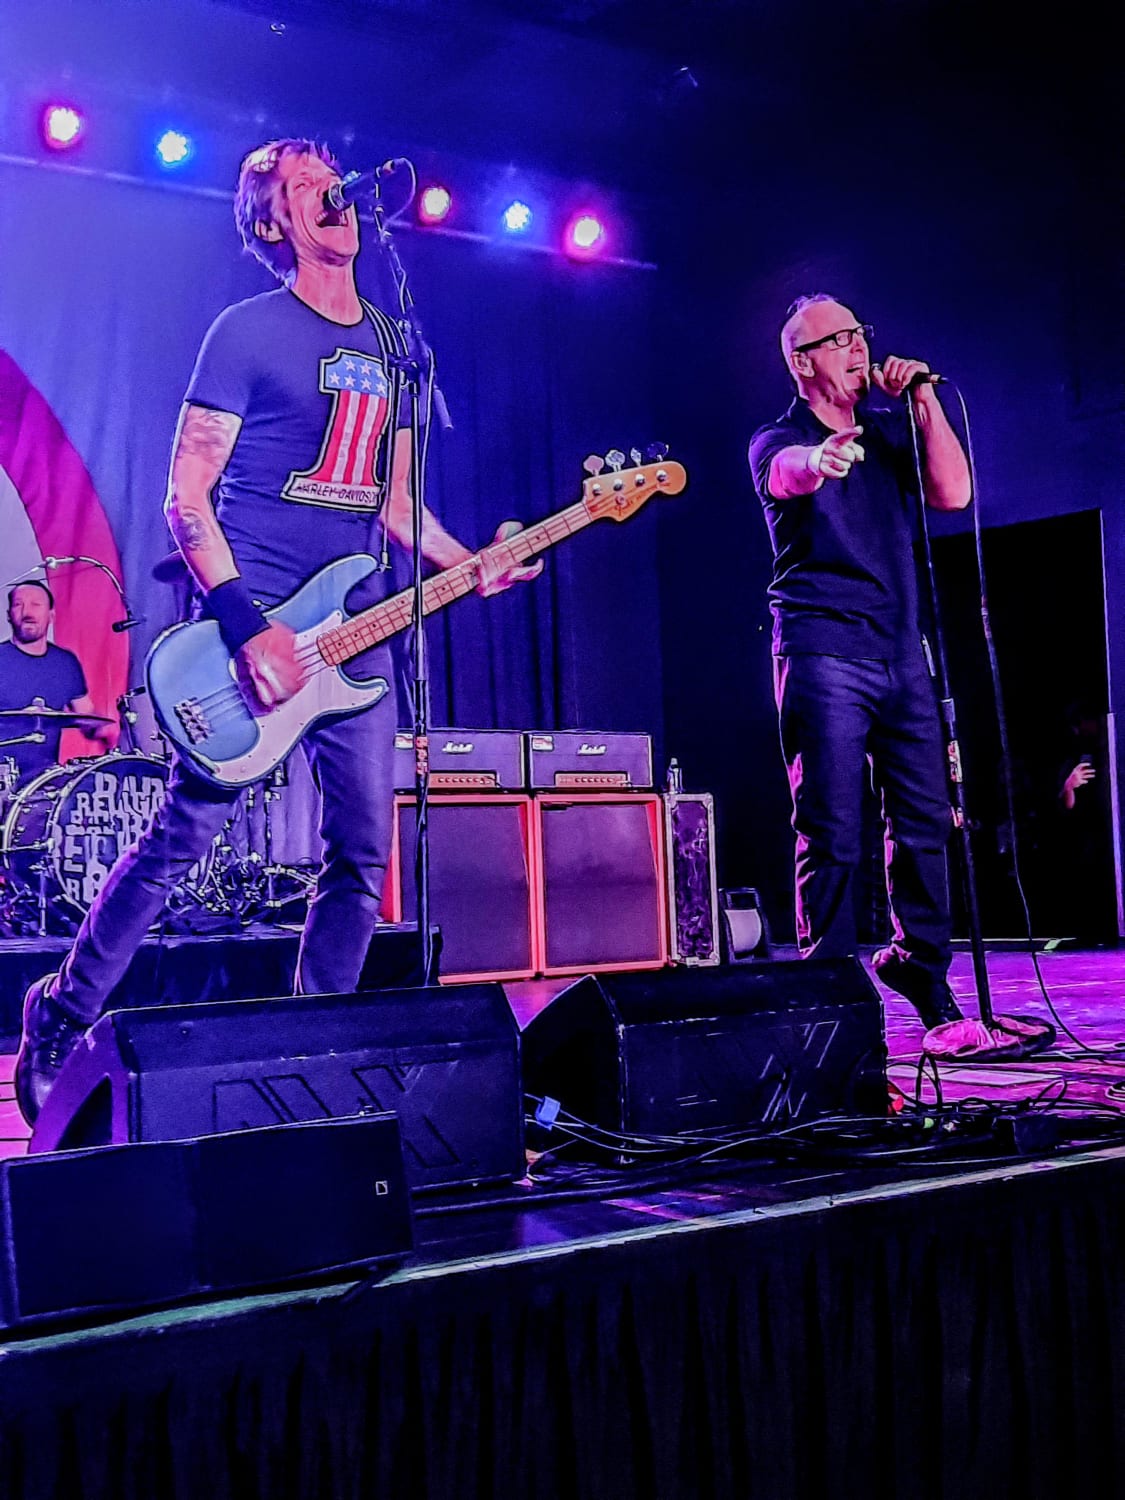 Jamie, Jay and Greg of Bad Religion, photo by me (I'm proud of this one)